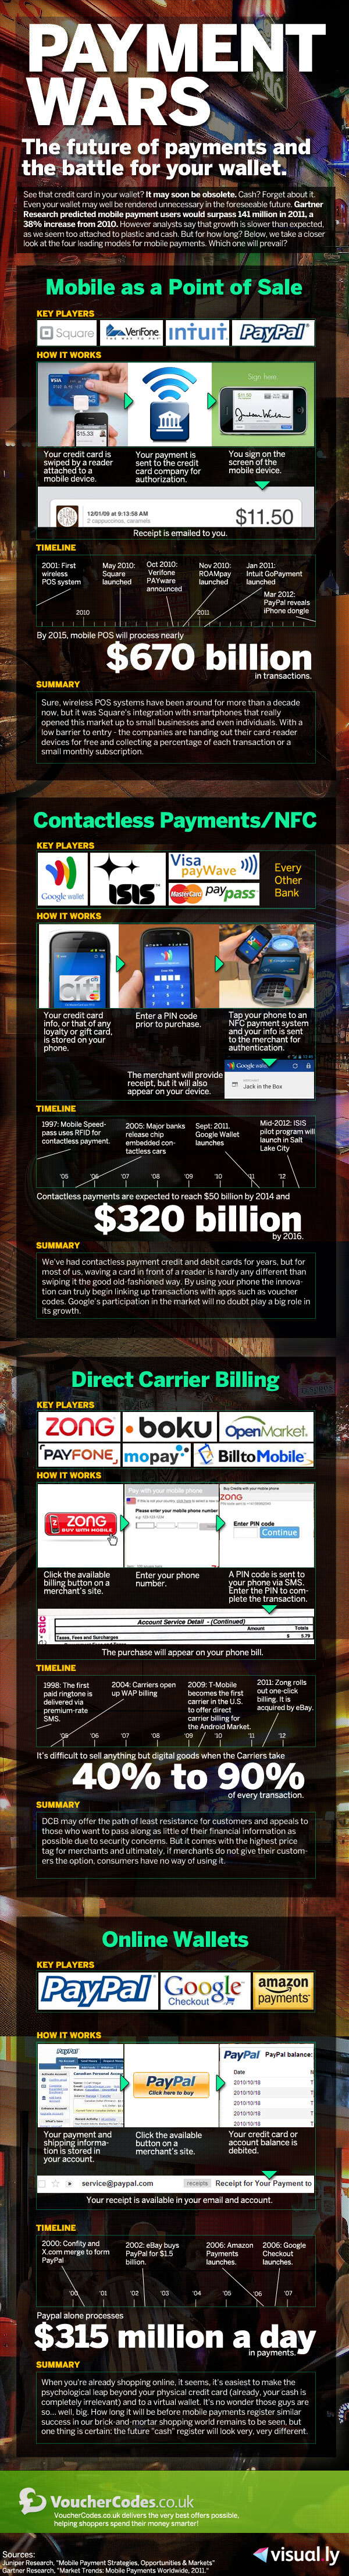 Infographic from Visual.ly showing a variety of facts about mobile payments